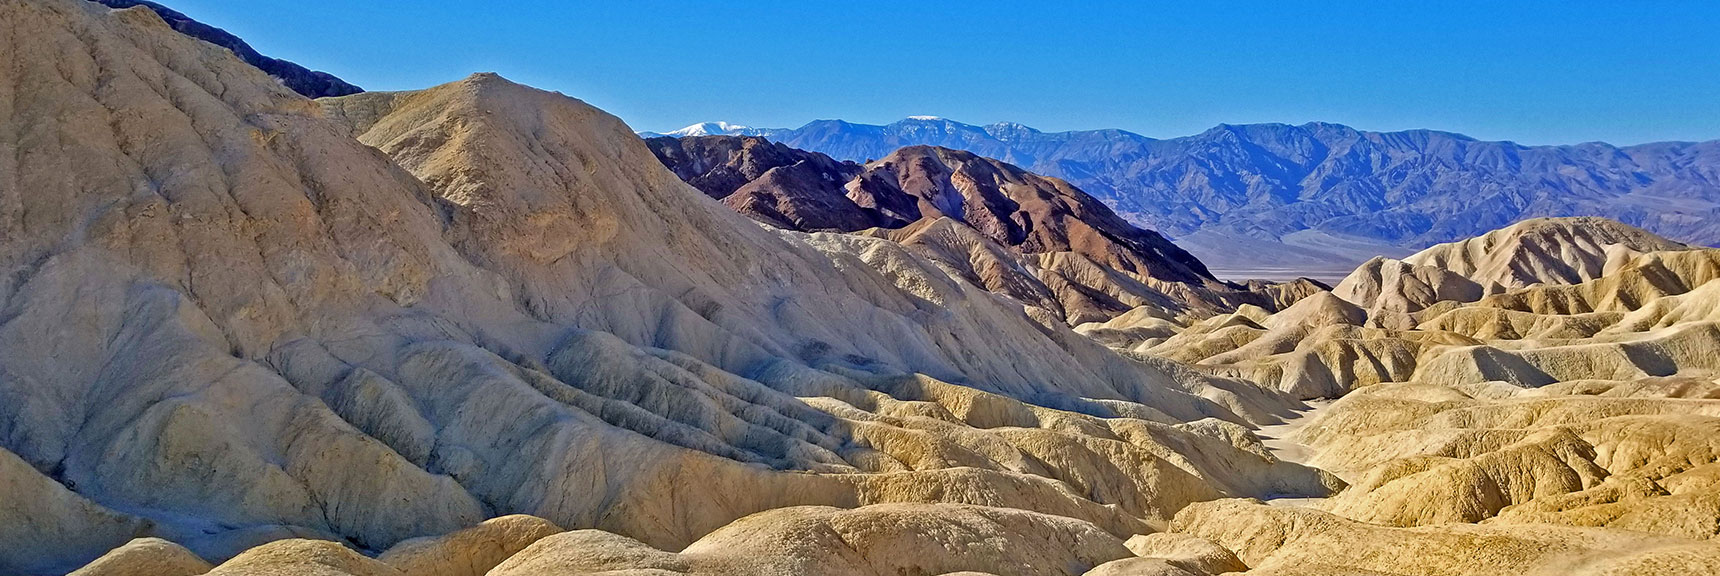 Golden Hills and Panamint Range from Near the Base of Zabriskie Point. | Golden Canyon to Zabriskie Point | Death Valley National Park, California